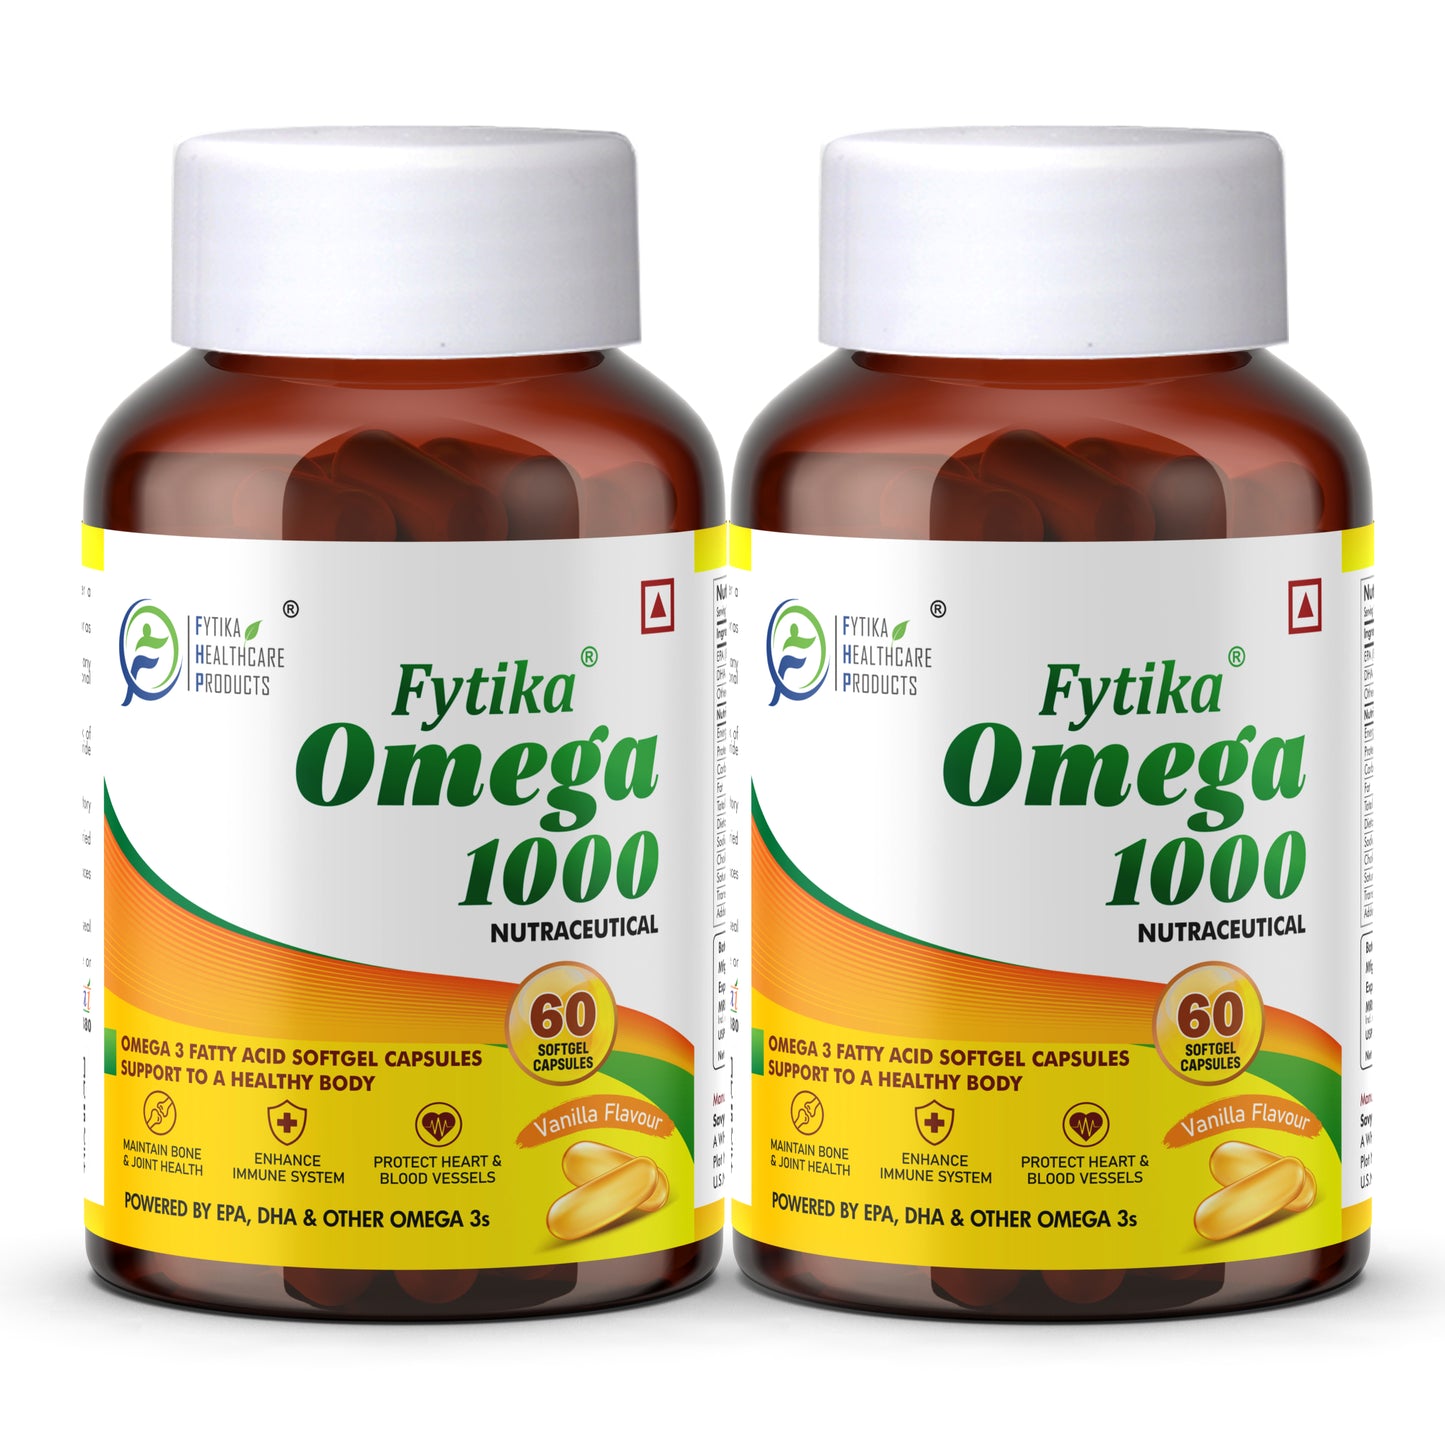 Fytika Omega 1000 - For Heart, Brain, Joint, Muscle Support, EPA 360 MG + DHA 240 MG, Omega Fatty Acids 400 MG, For Men, Women  - Pack of 2 (120 Capsules)